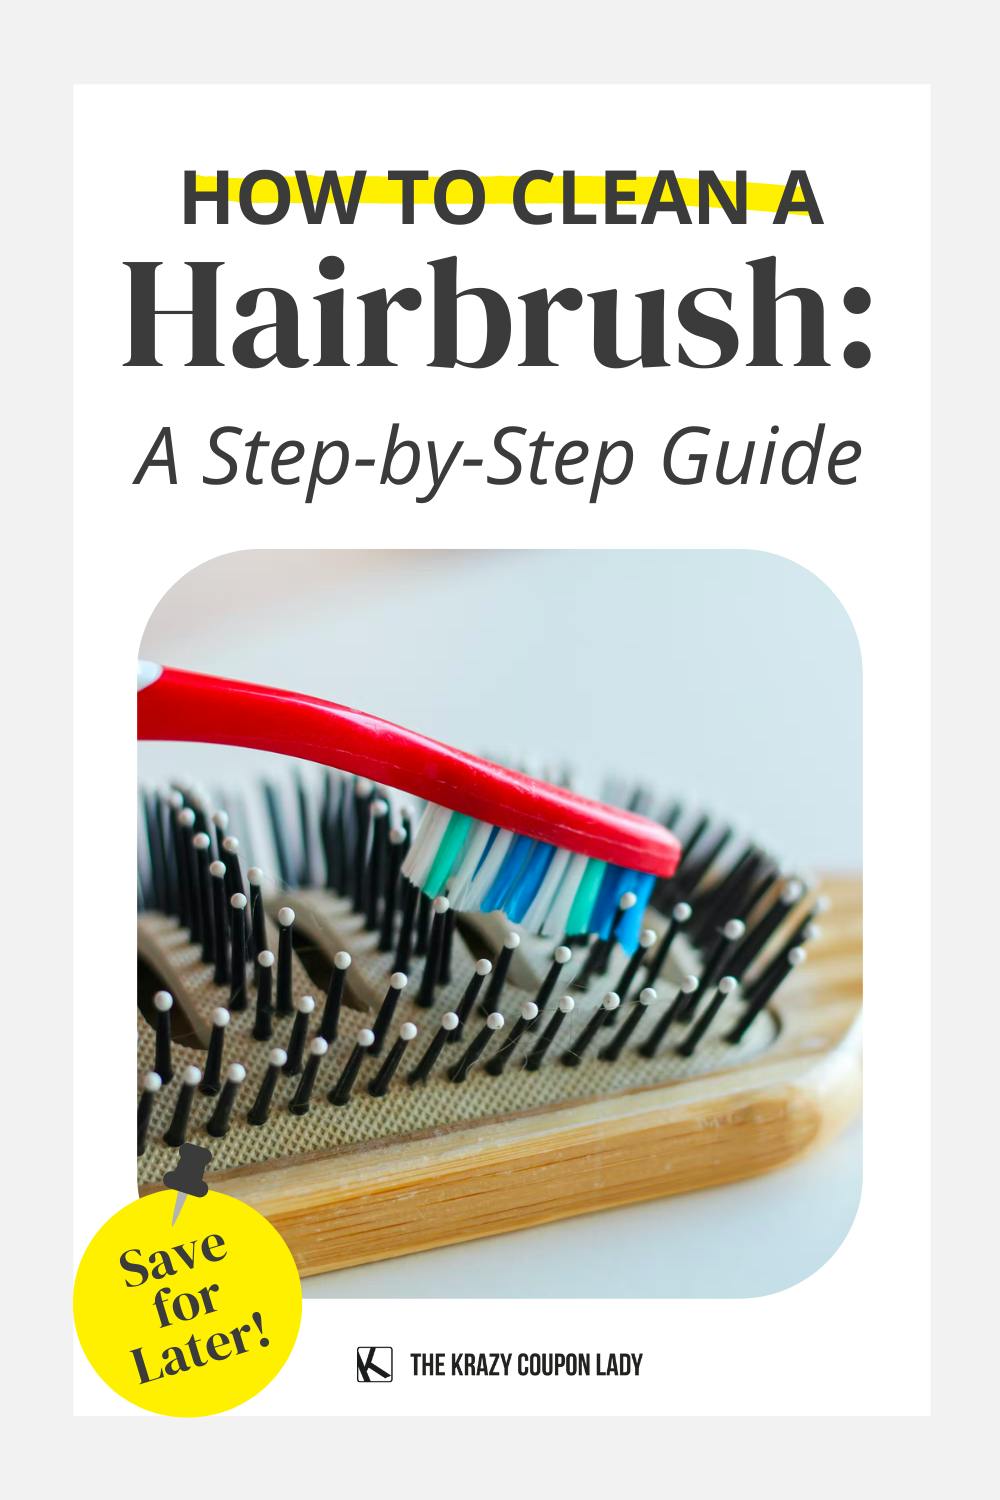 How to Clean a Hairbrush: Your Step-by-Step Guide